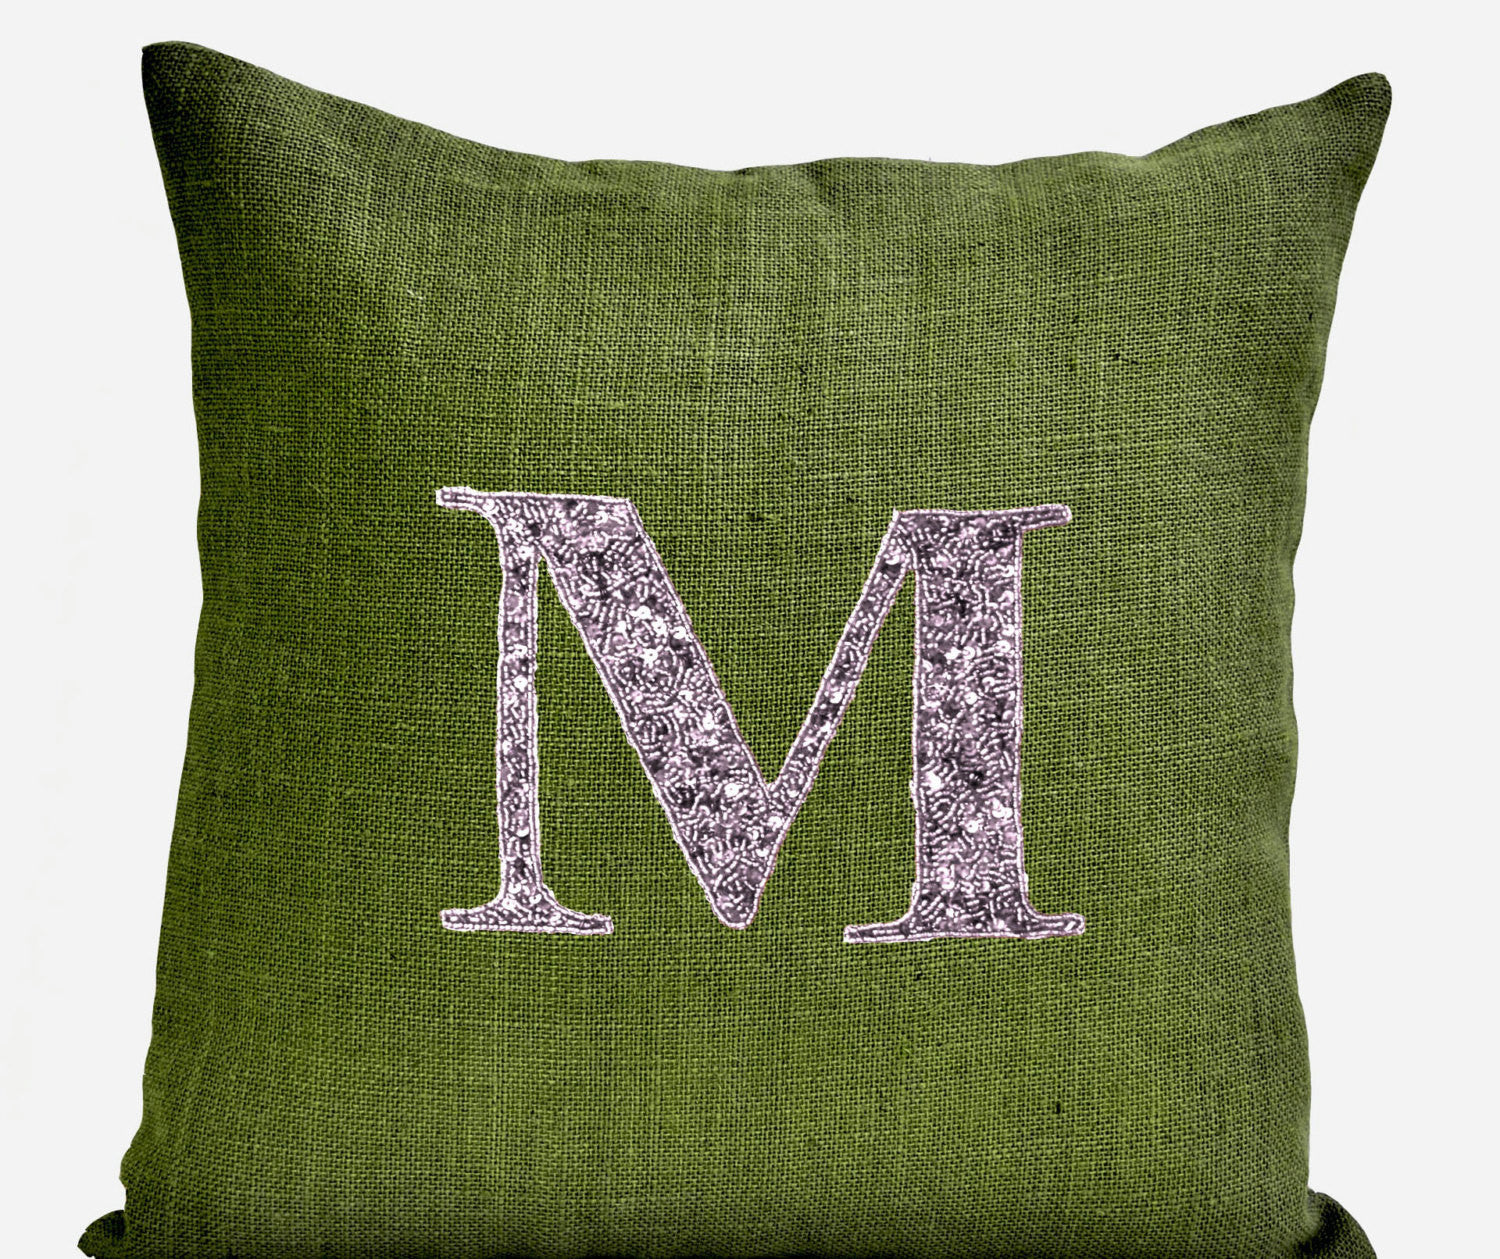 Handmade green pillow with silver sequin and monogram